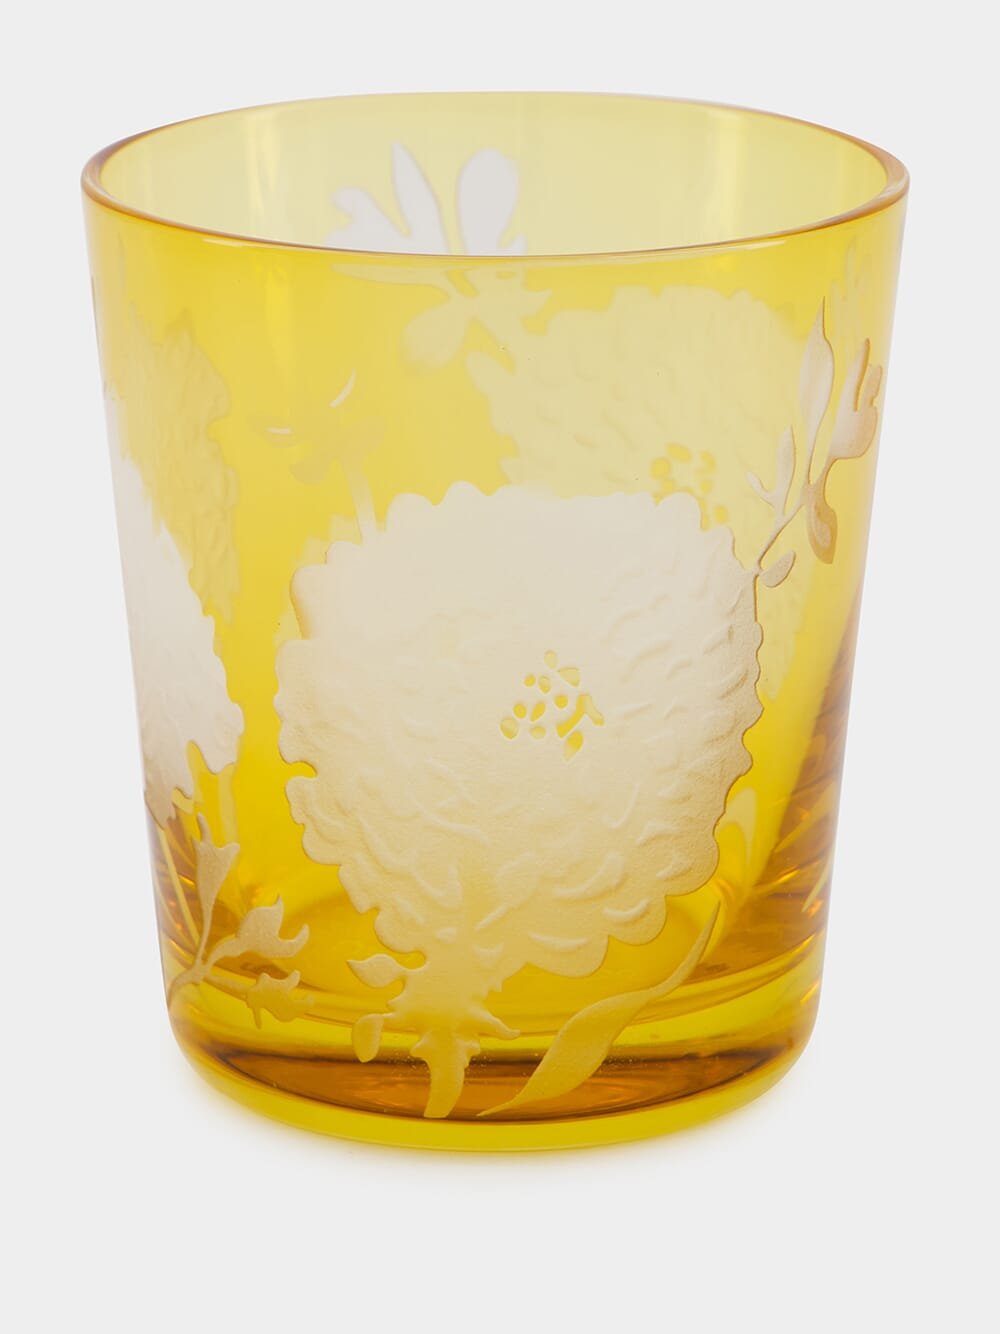 Pols PottenSet of 6 Peony Tumblers Glasses at Fashion Clinic